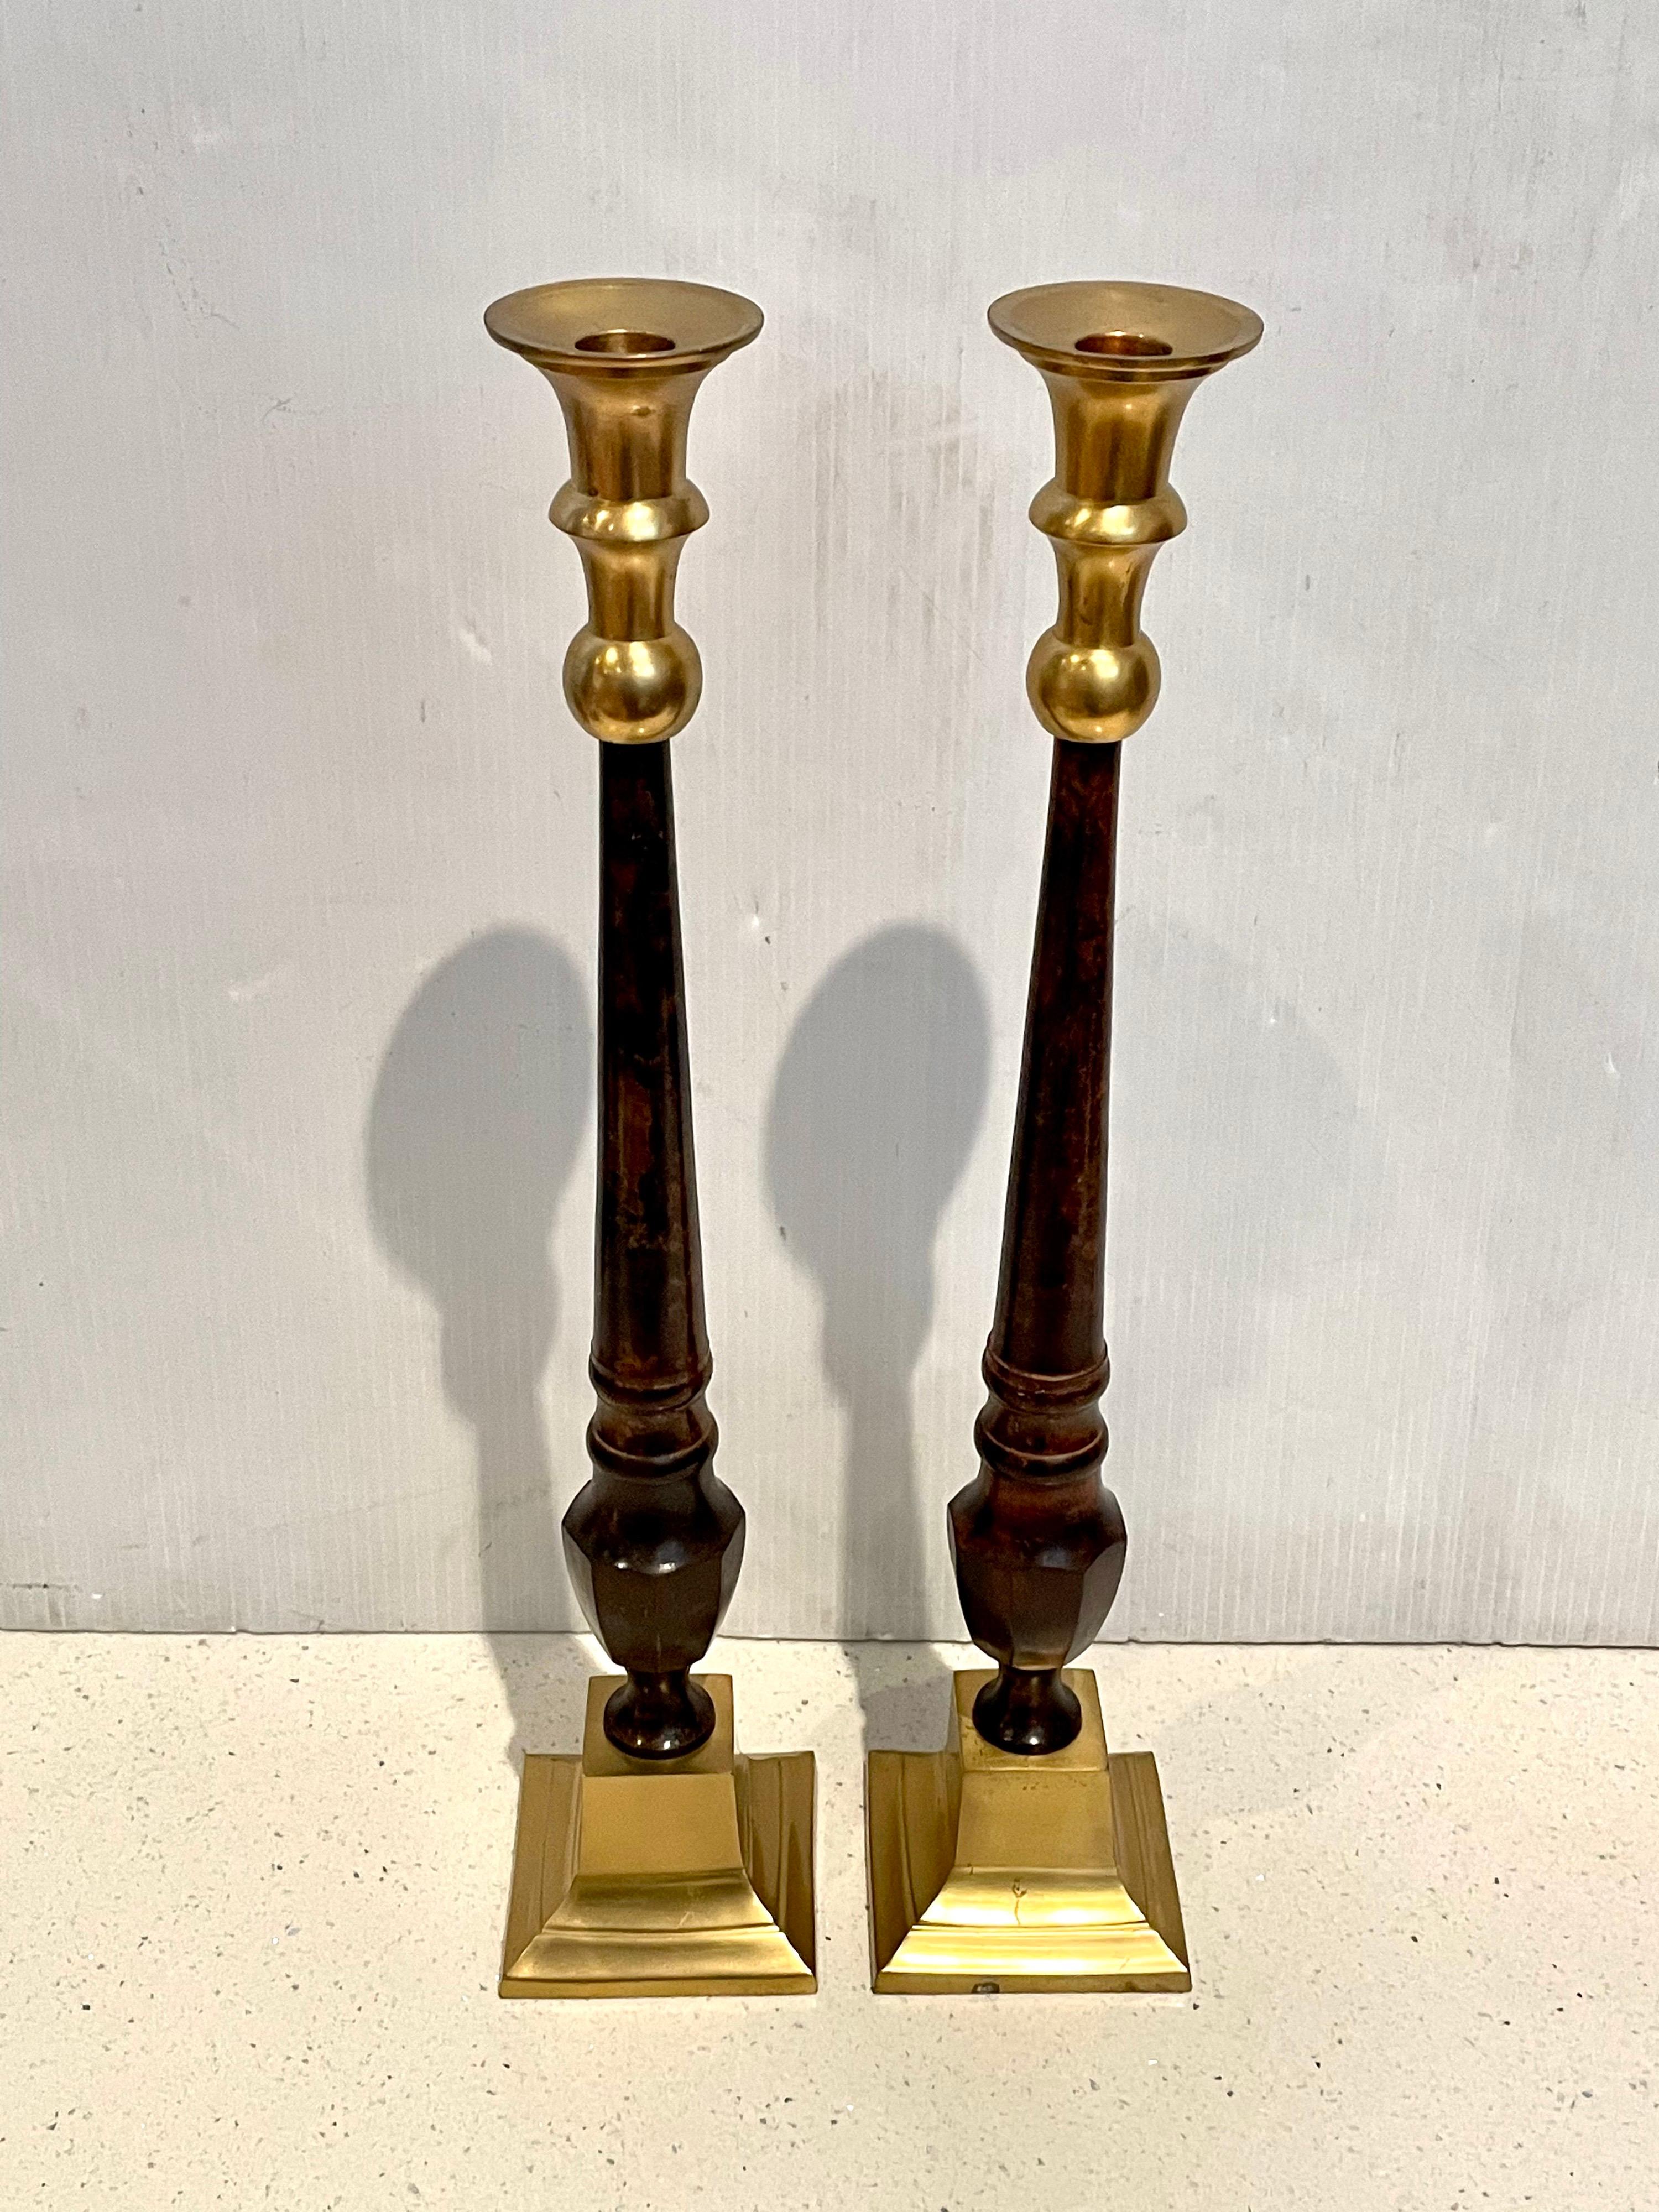 North American Tall Pair of Hollywood Regency Brass & Faux Marble Candle Holders